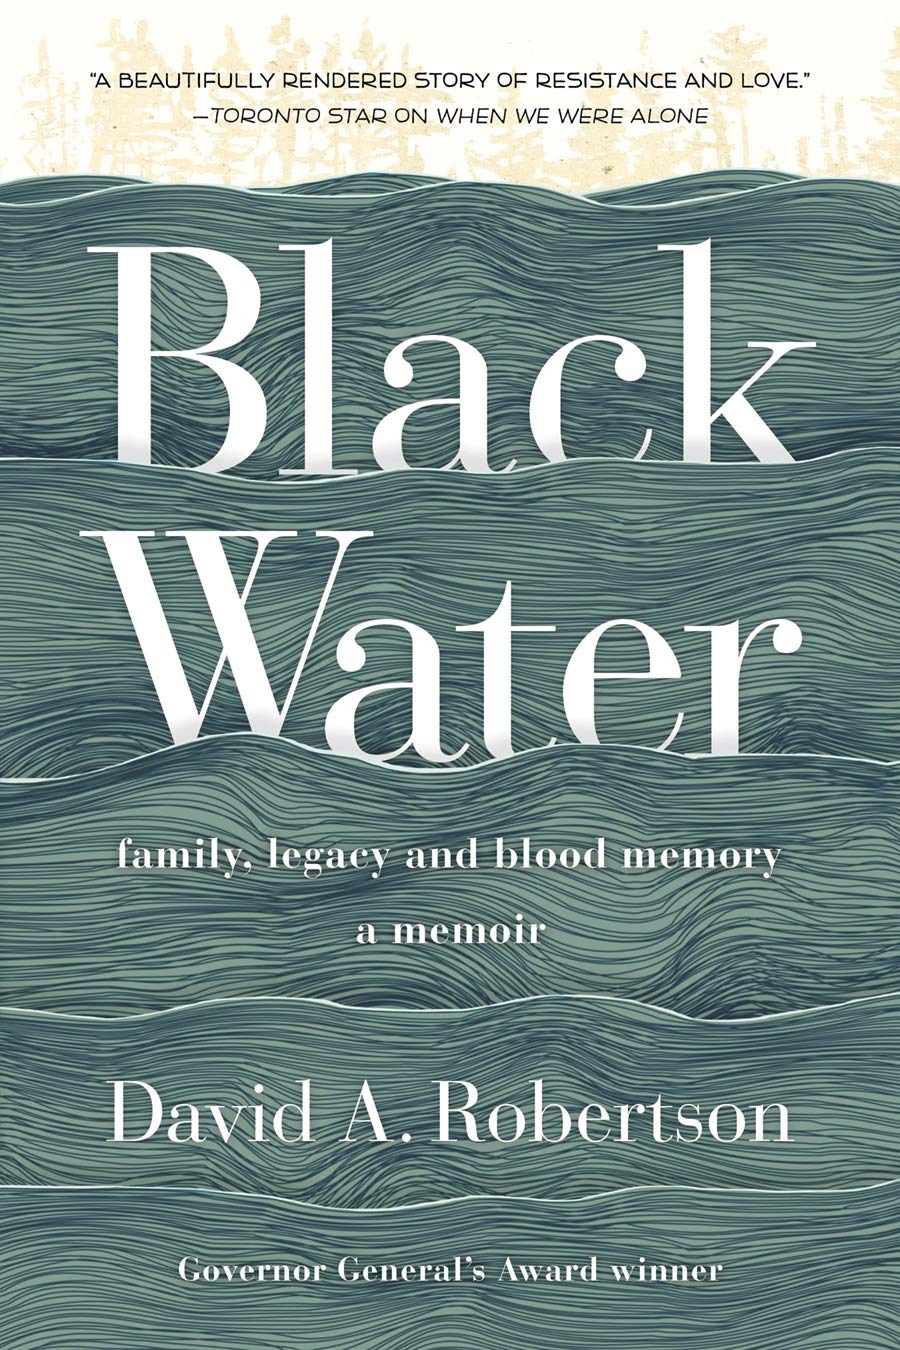 Black Water: Family, Legacy, and Blood Memory [David A. Robertson]